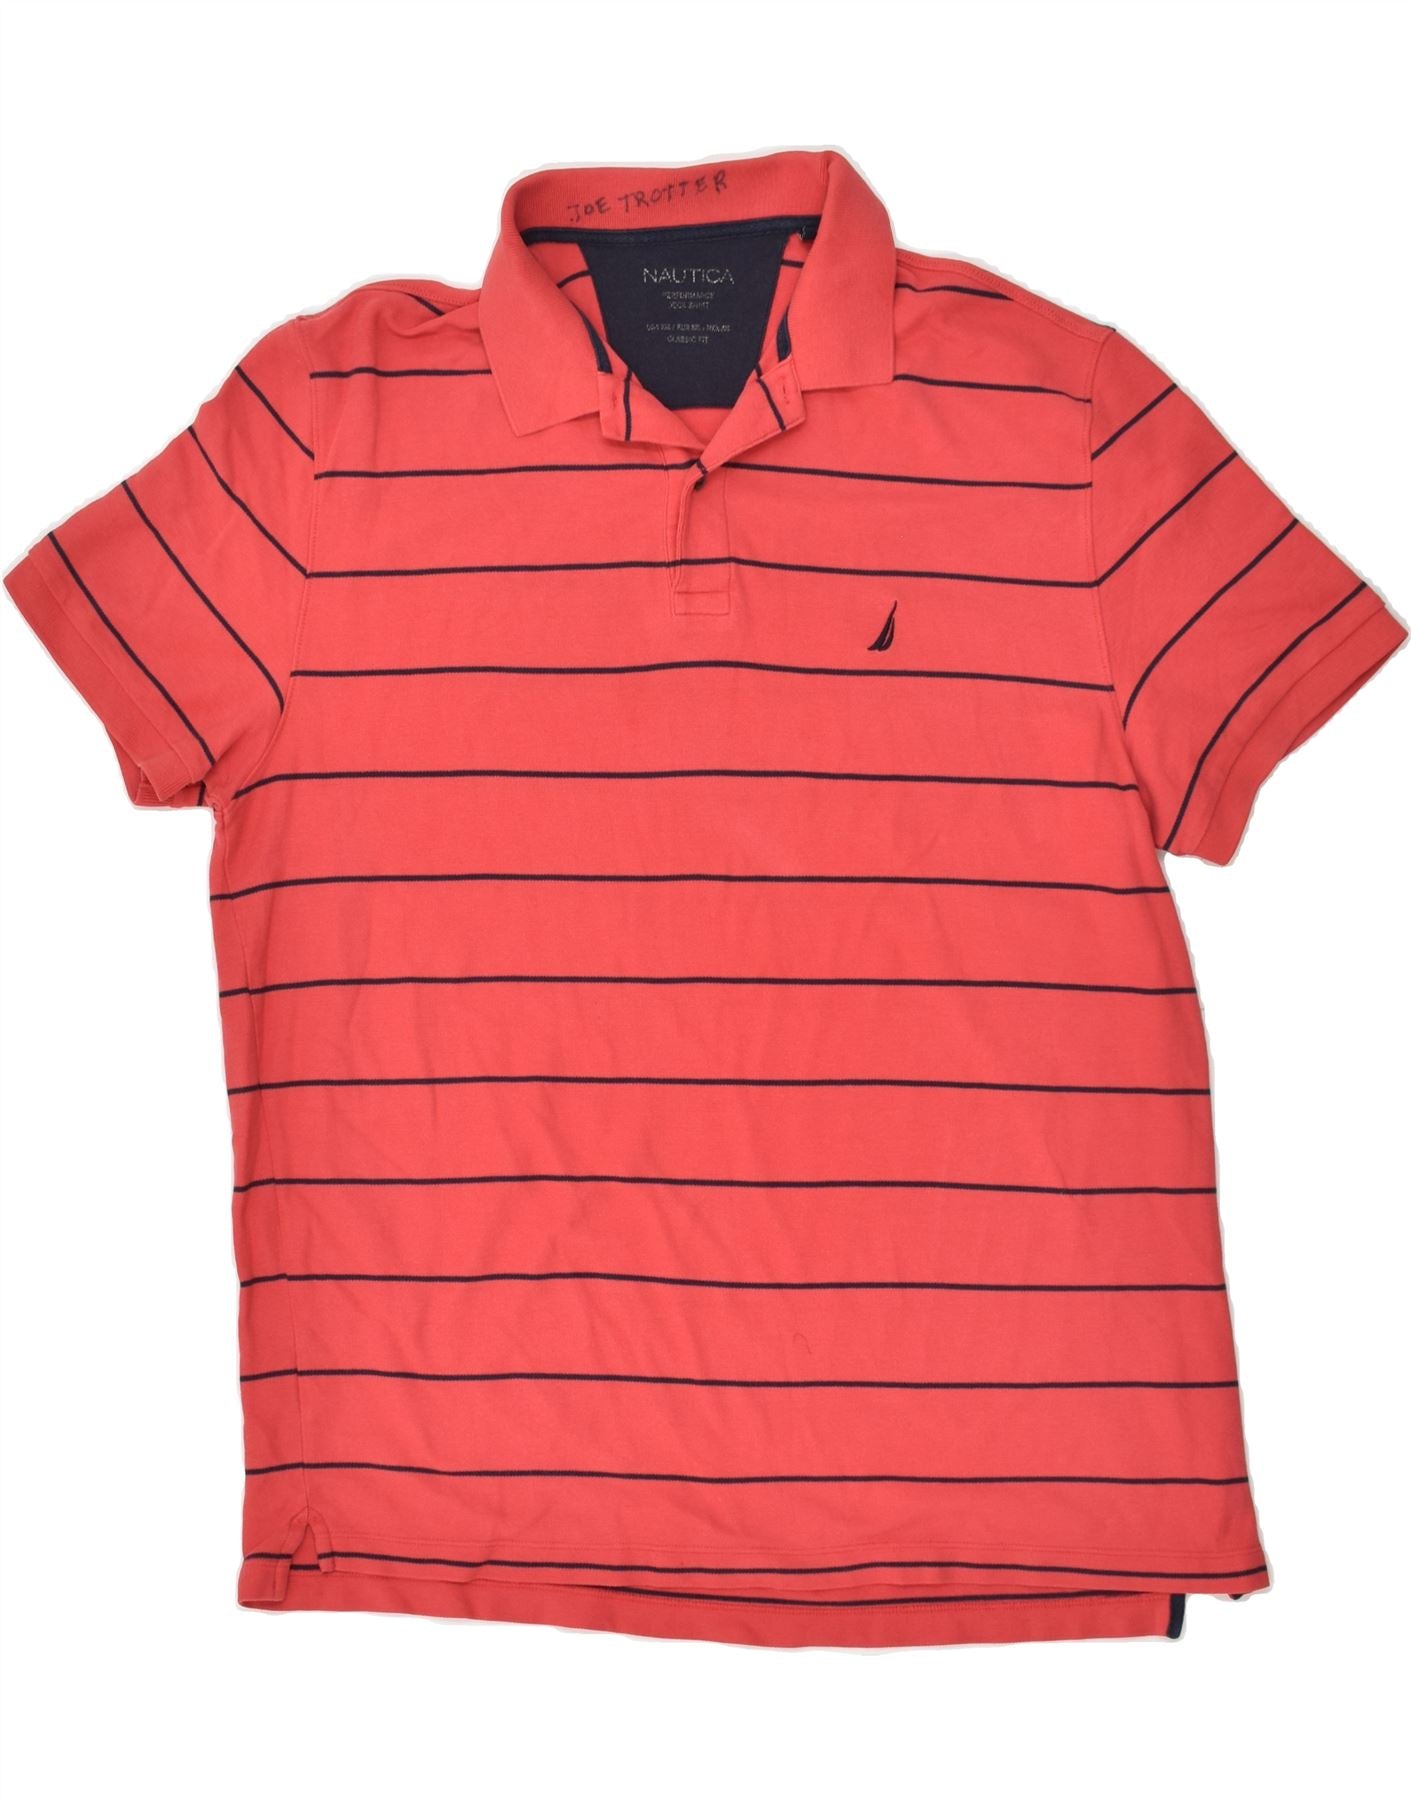 NAUTICA Mens Classic Fit Polo Shirt XL Red Striped Cotton, Vintage &  Second-Hand Clothing Online